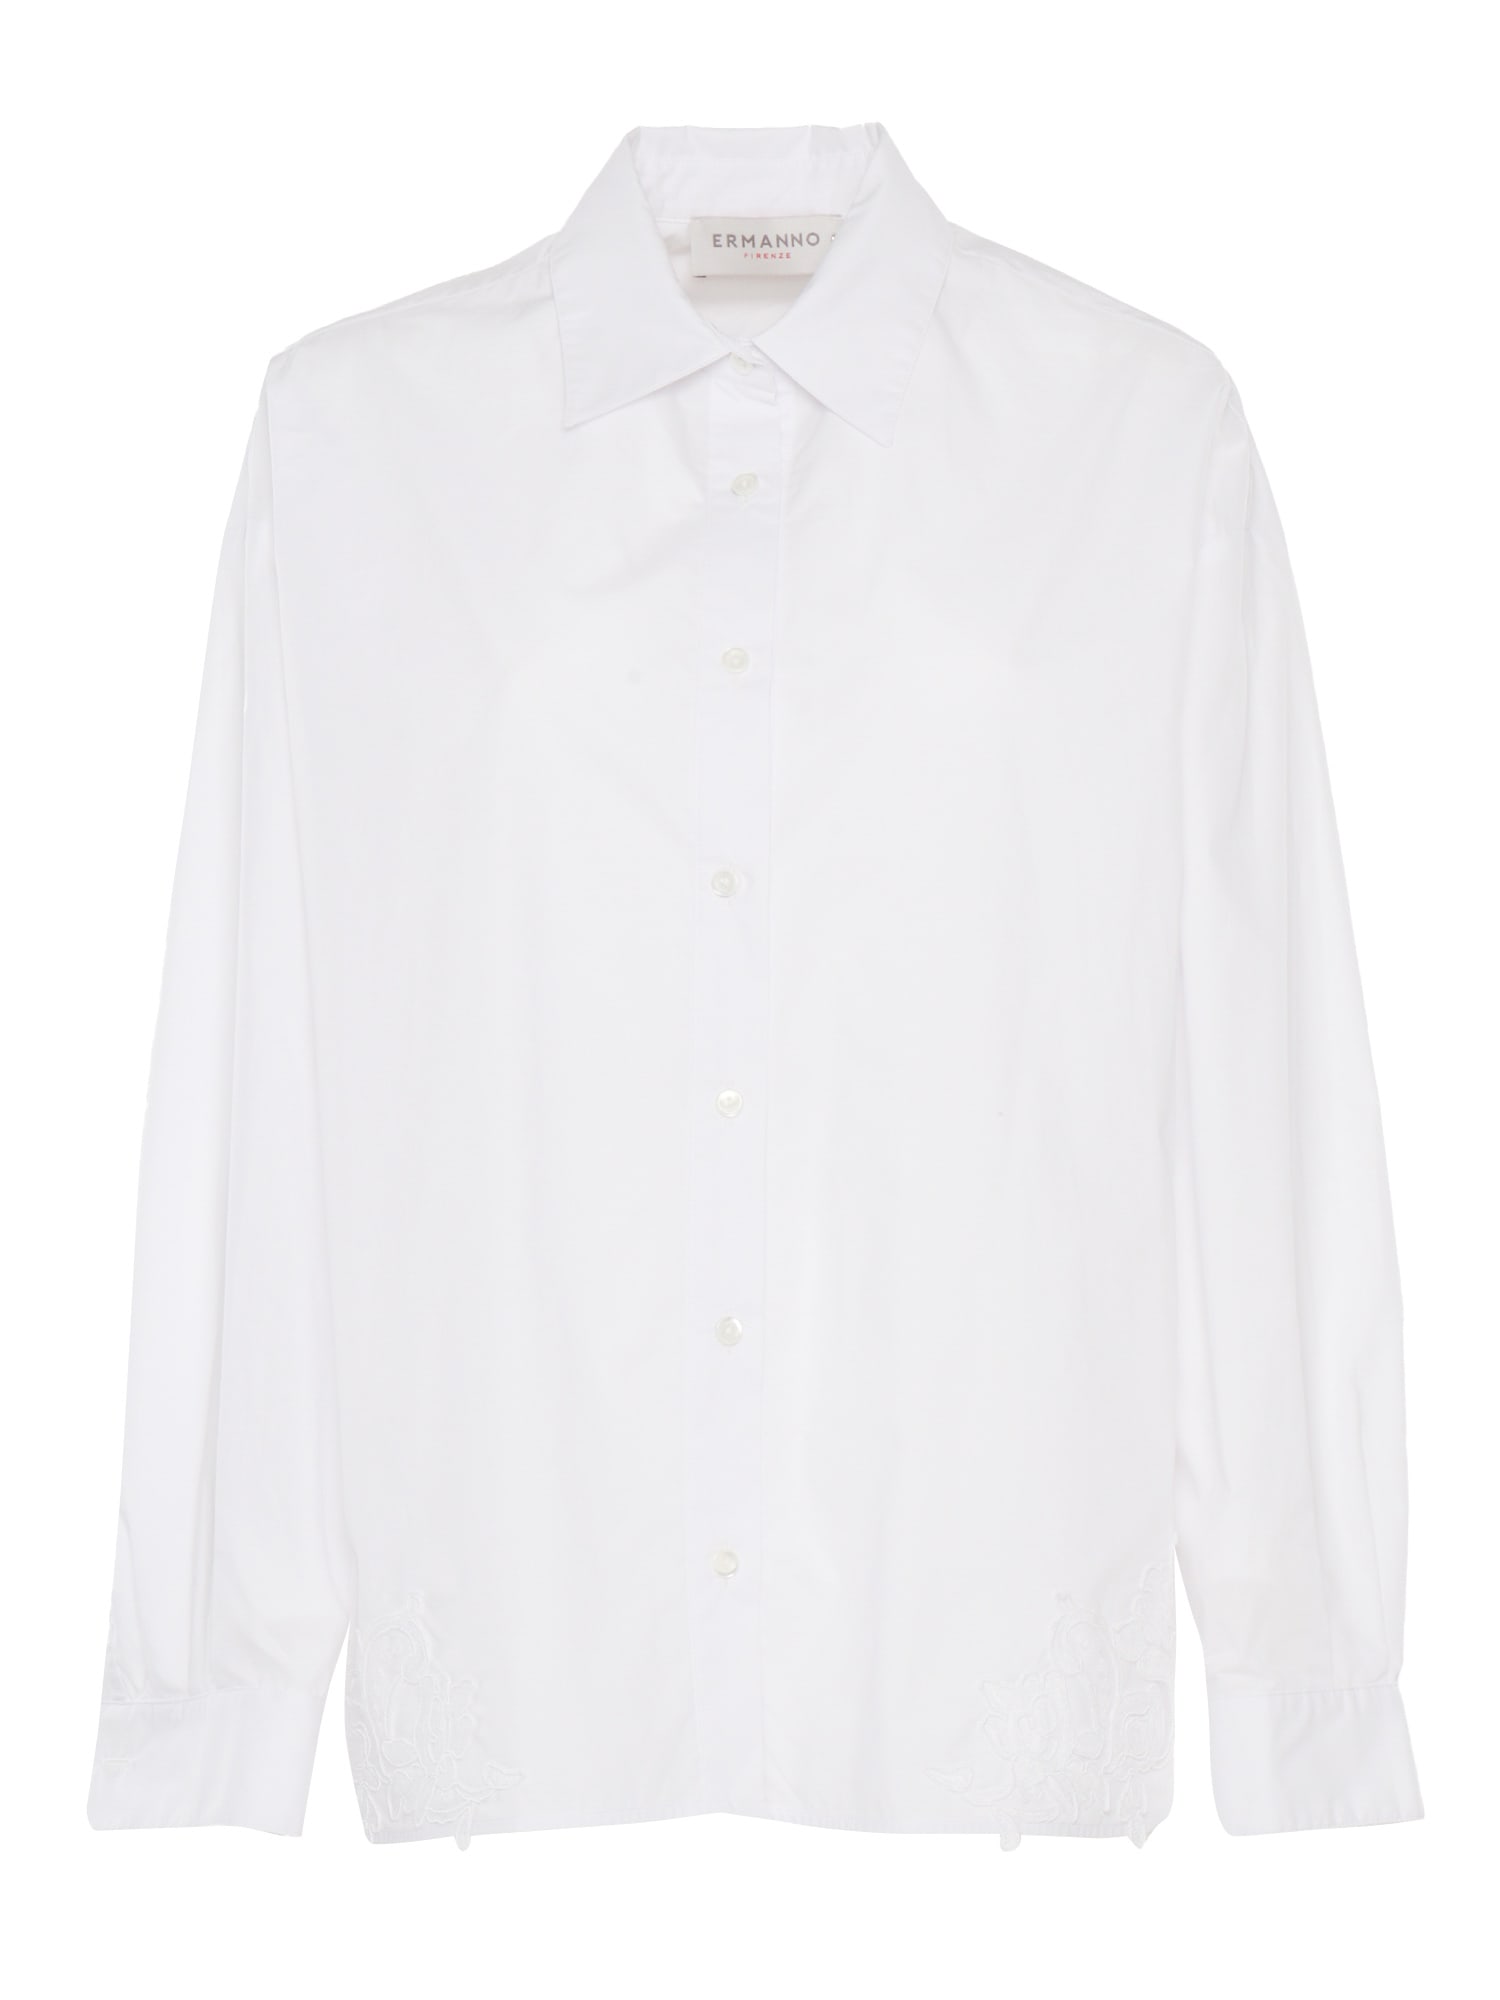 Ermanno Ermanno Scervino Shirt With Patch Embroidery